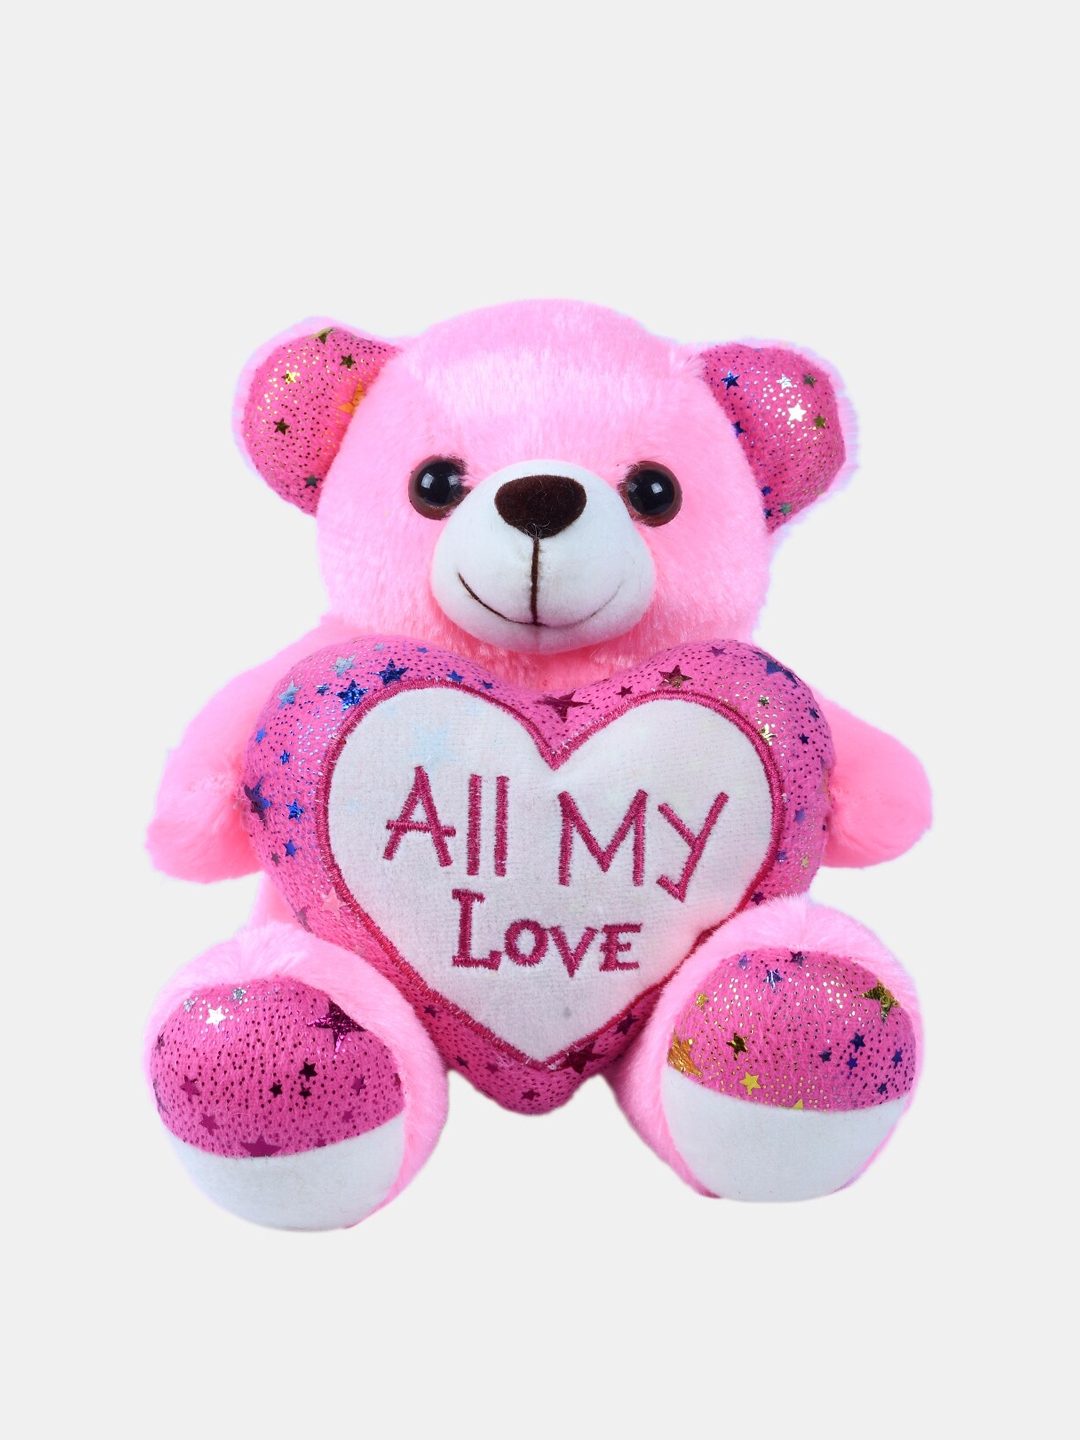 DukieKooky Unisex Kids Pink   White Polyester Teddy Bear With Embroidered Heart Soft Toy